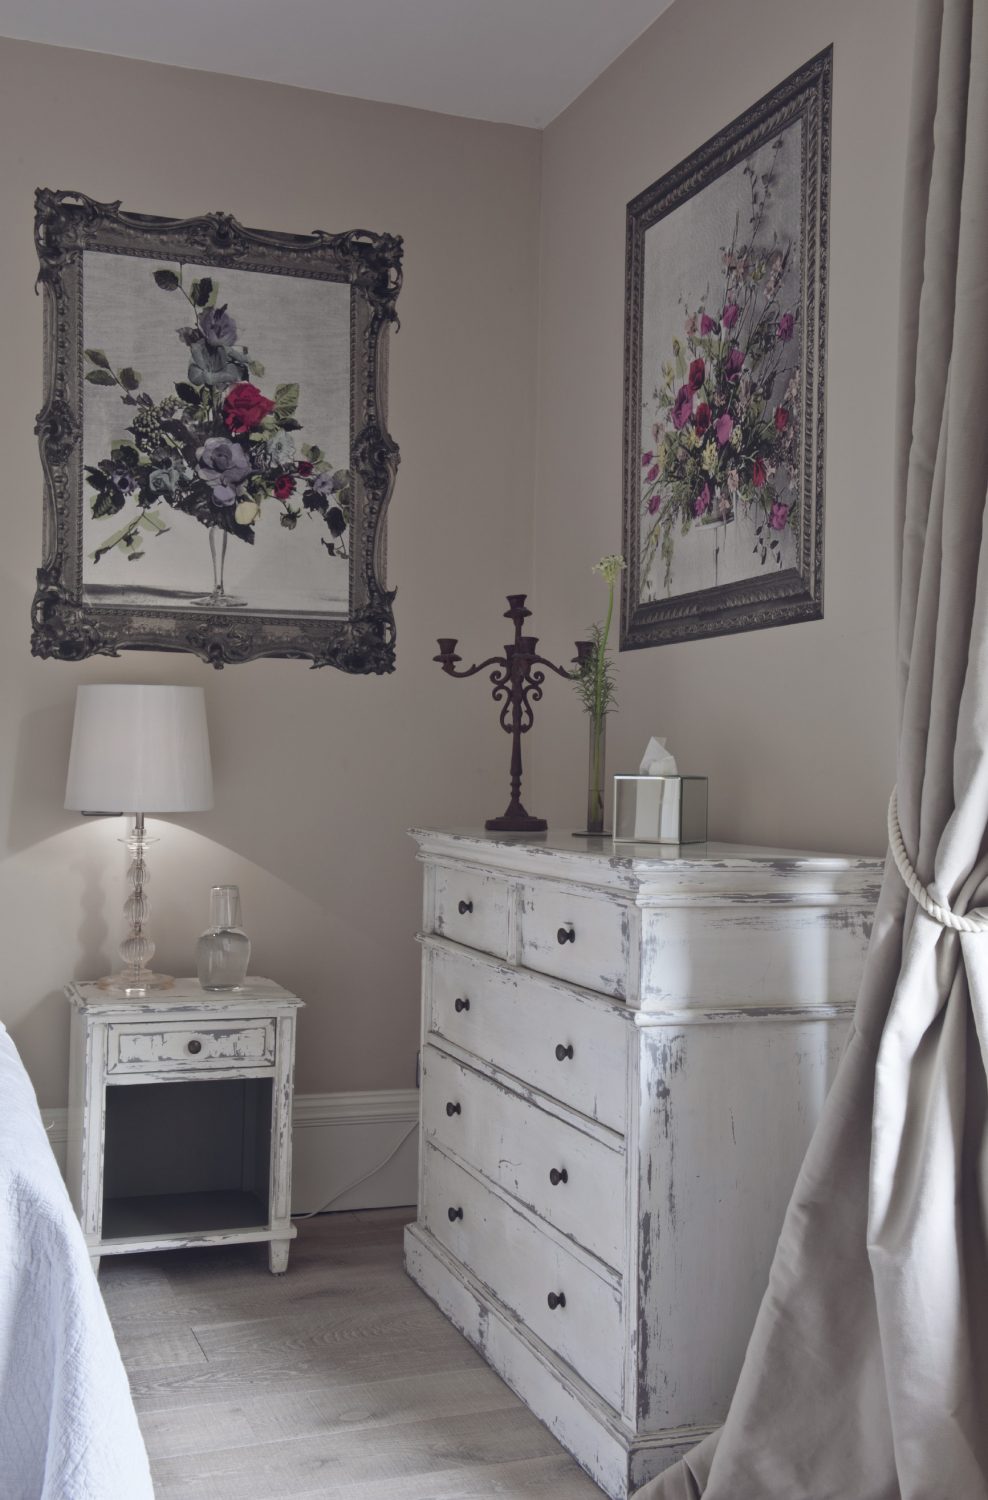 Designer Deborah Bowness’ unique floral wall pieces take centre stage in the airy Croft bedroom